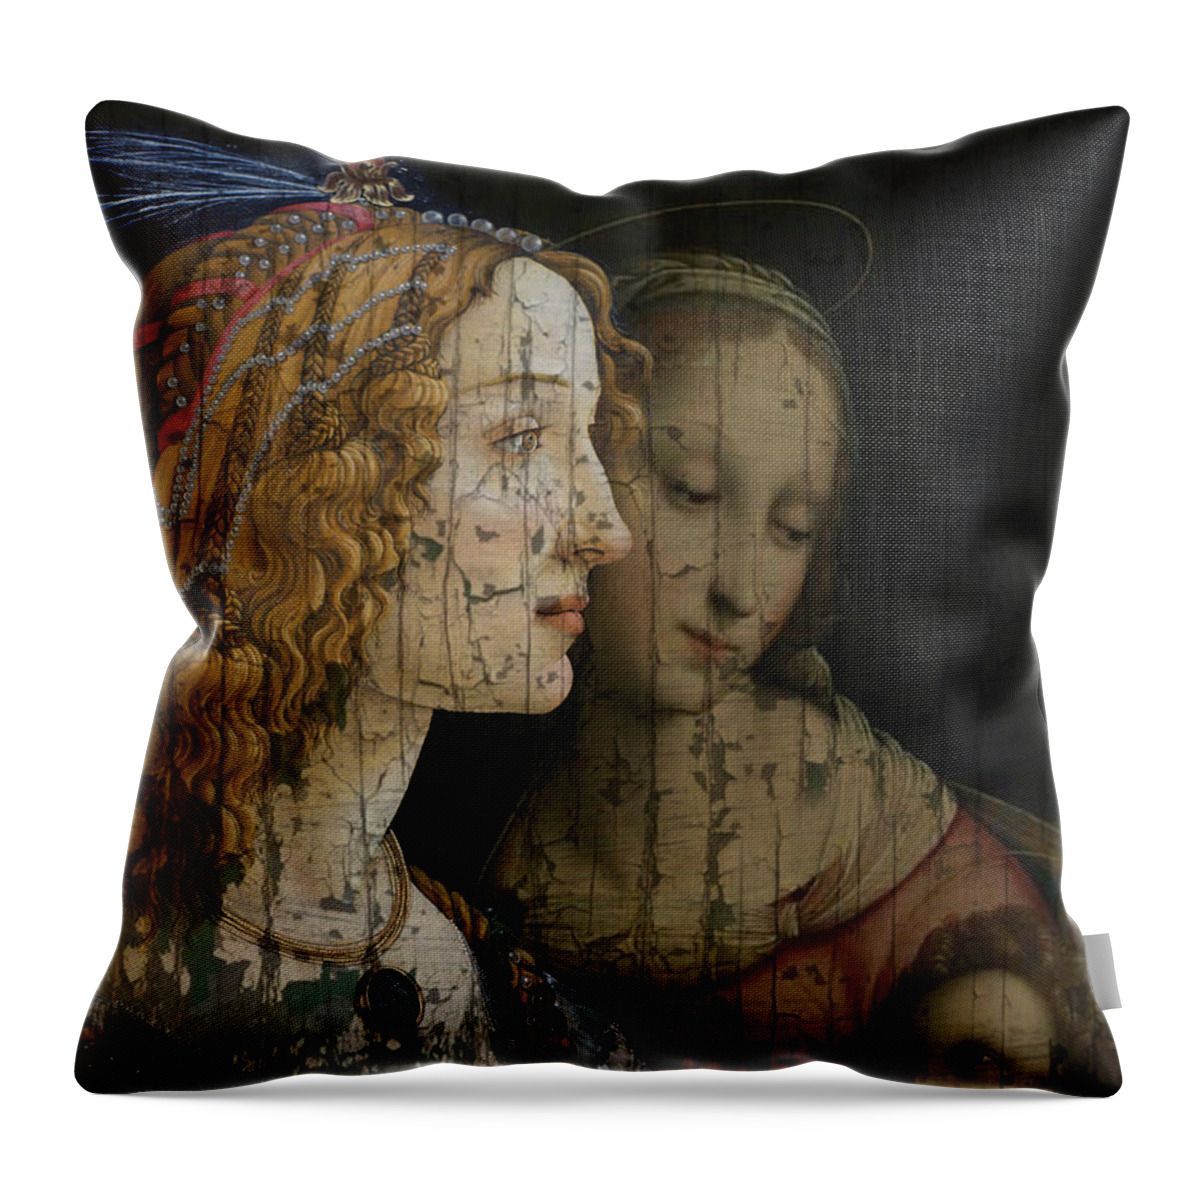 Infertility Throw Pillow featuring the mixed media My Special Child by Paul Lovering